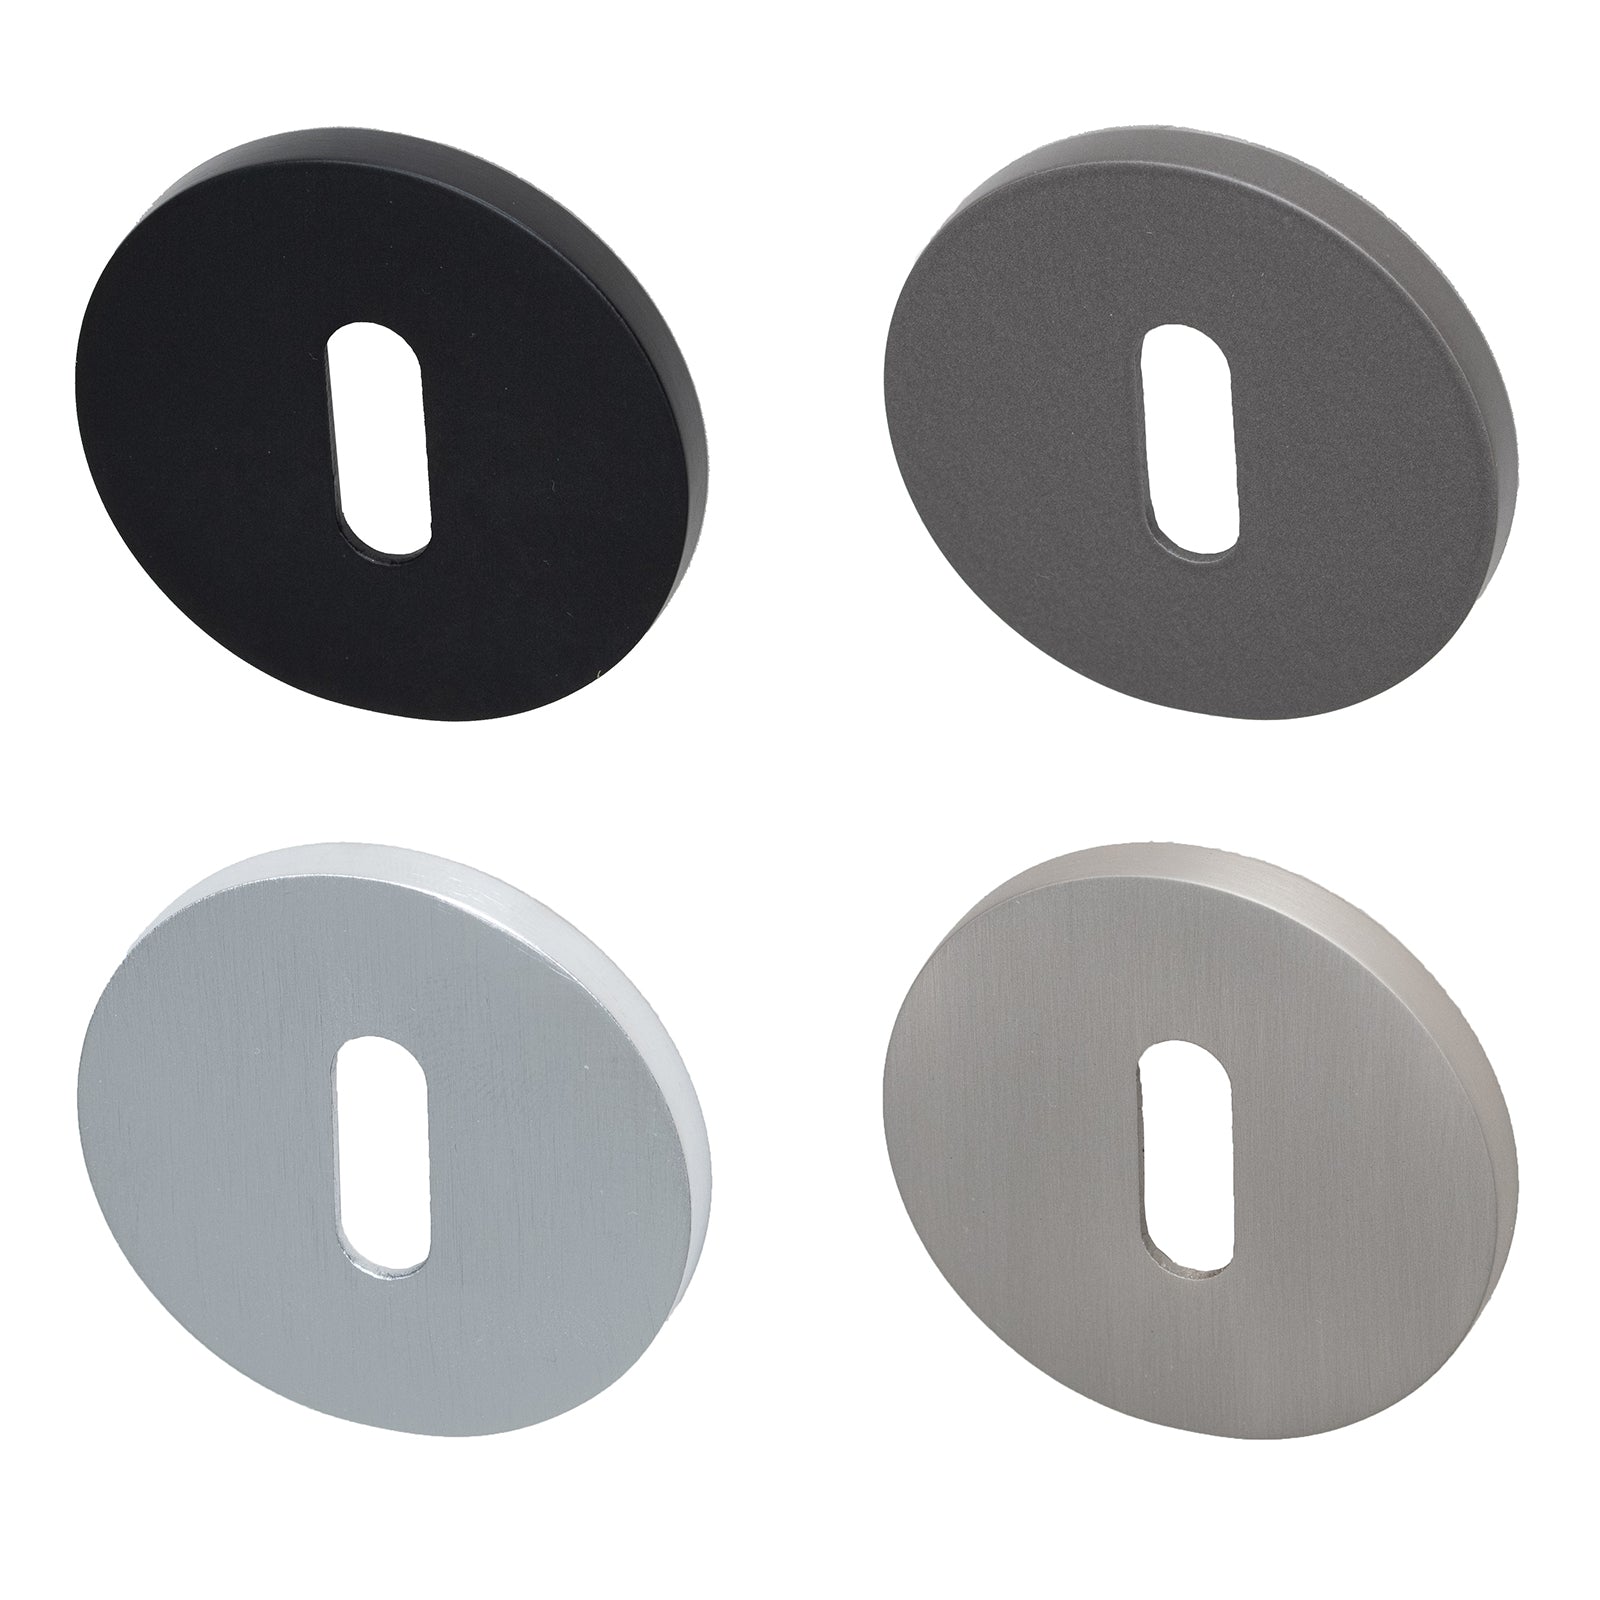 Tupai British Standard round escutcheon for use with 3 & 5 lever locks, in four finishes, Nickel Pearl, Black Pearl, Satin Chrome, and Titan.